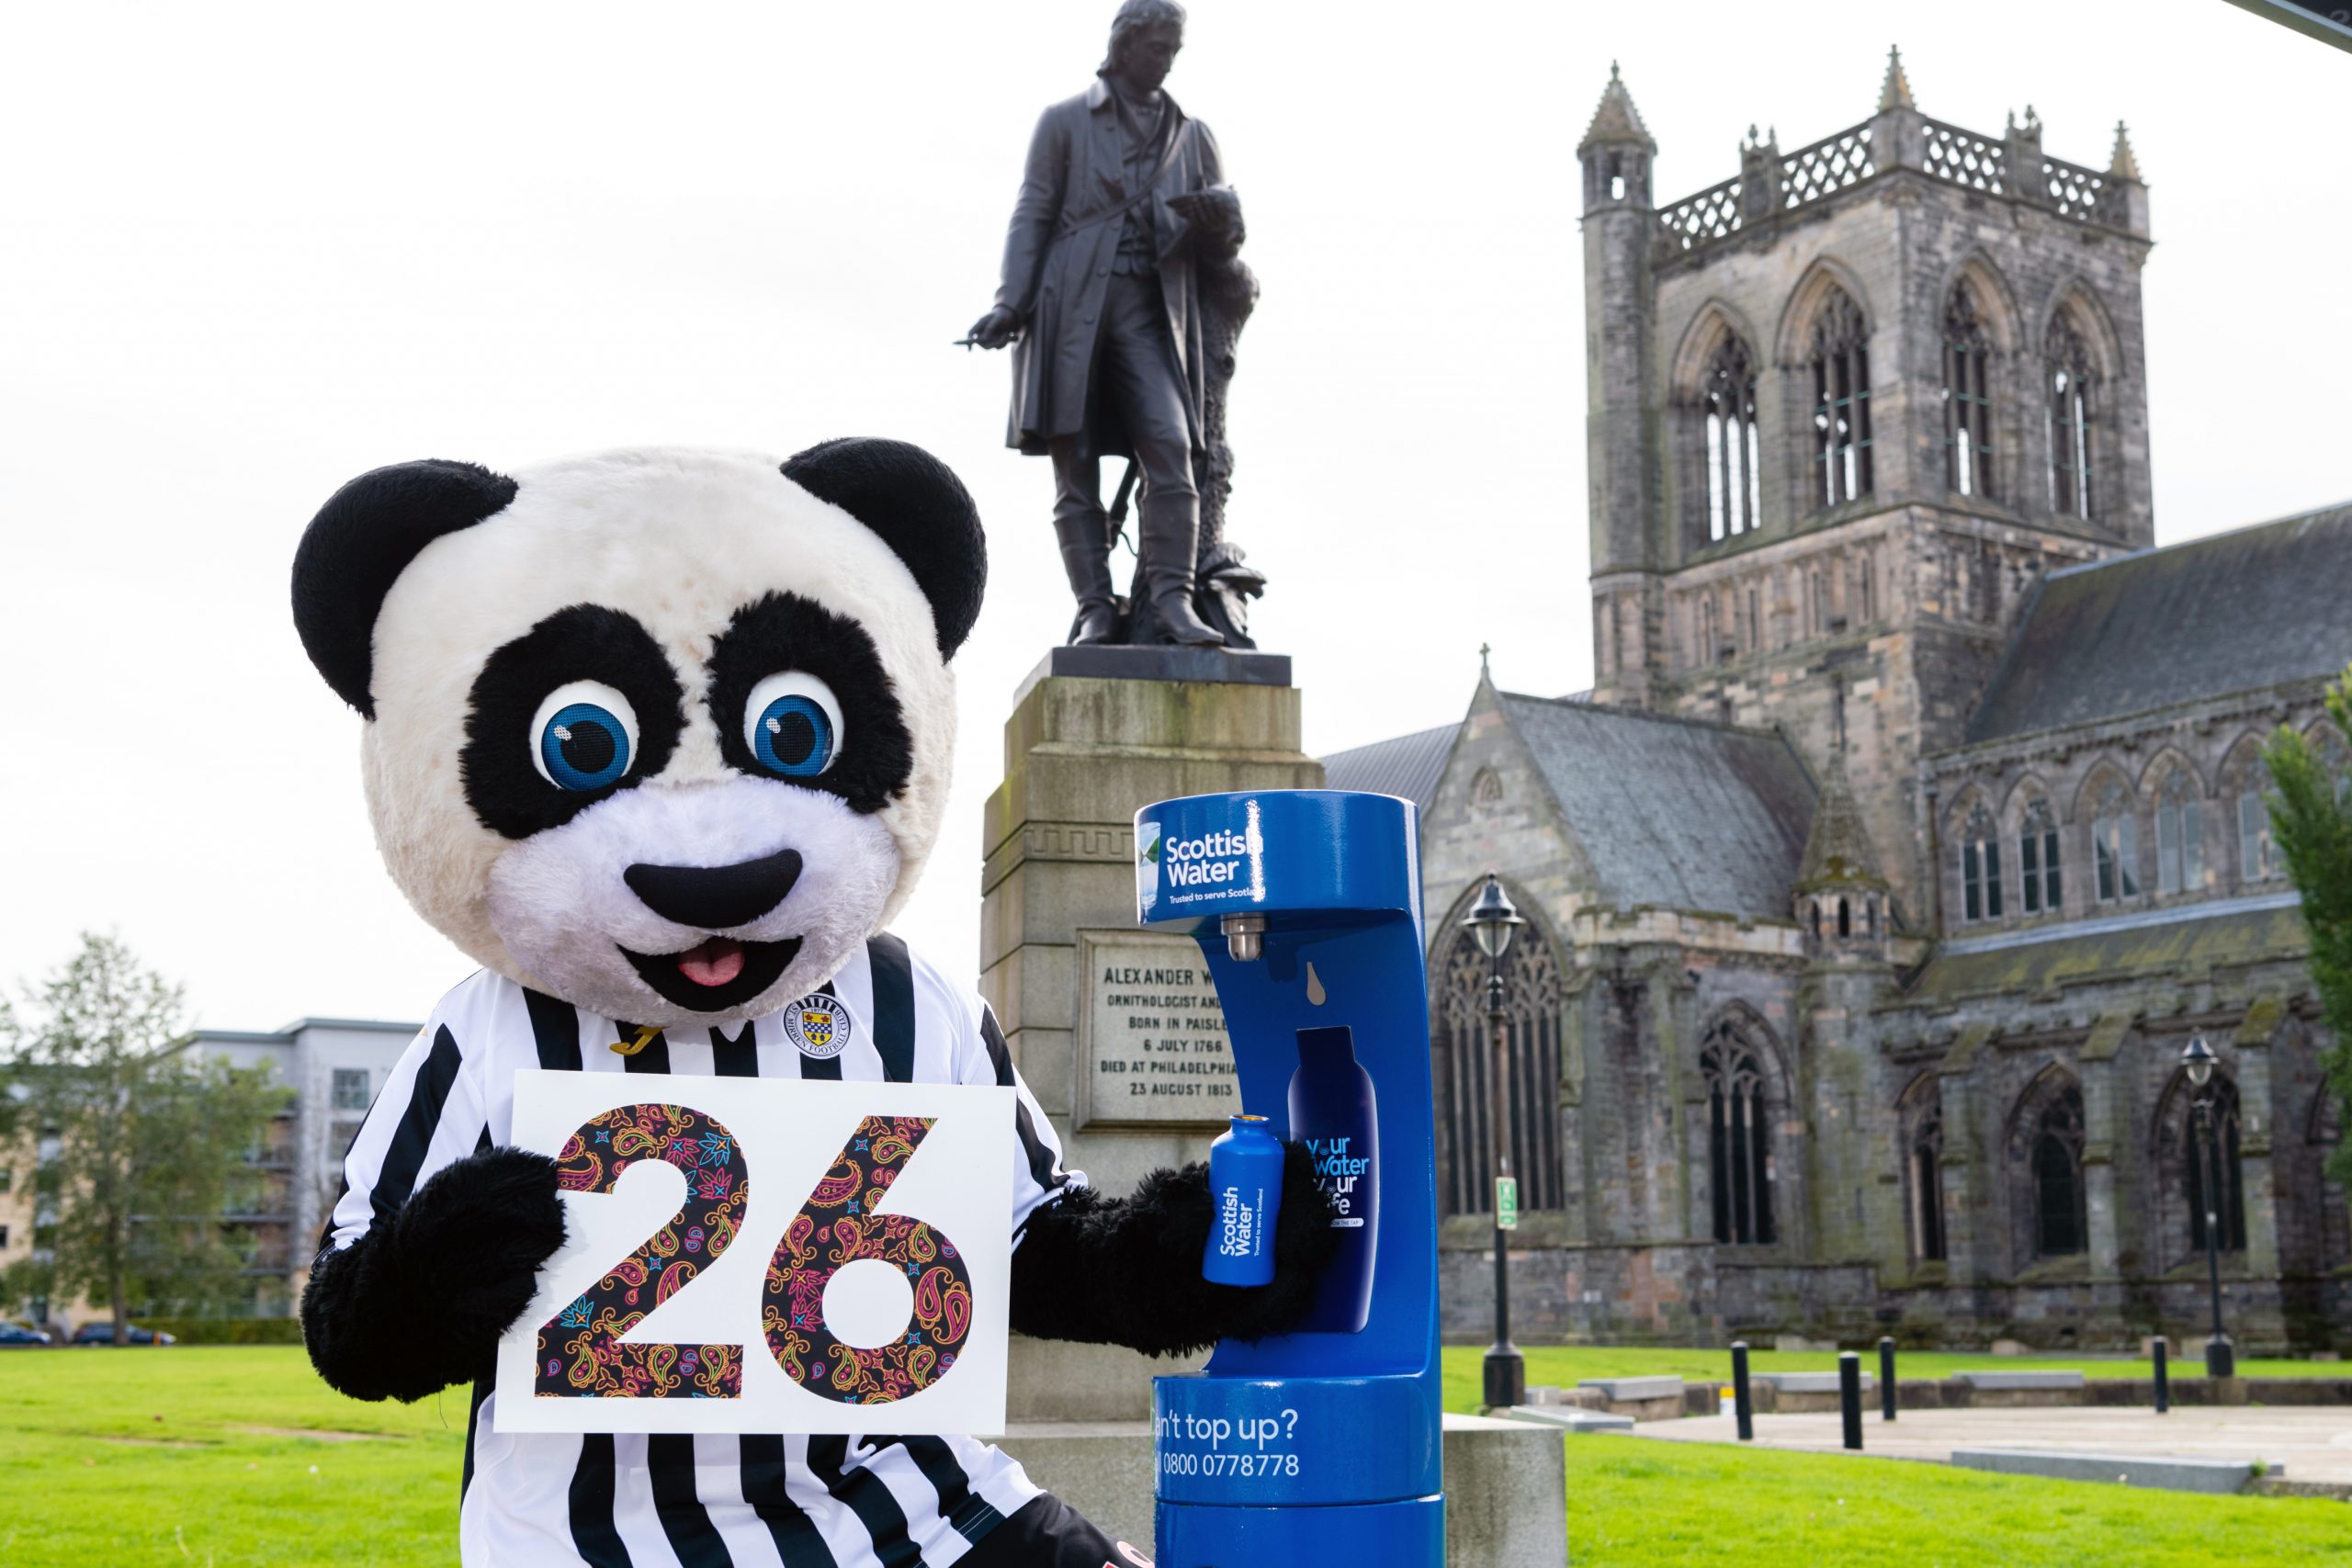 REFILLABLE WATER BOTTLE A ‘BEAR’ NECESSITY IN PAISLEY